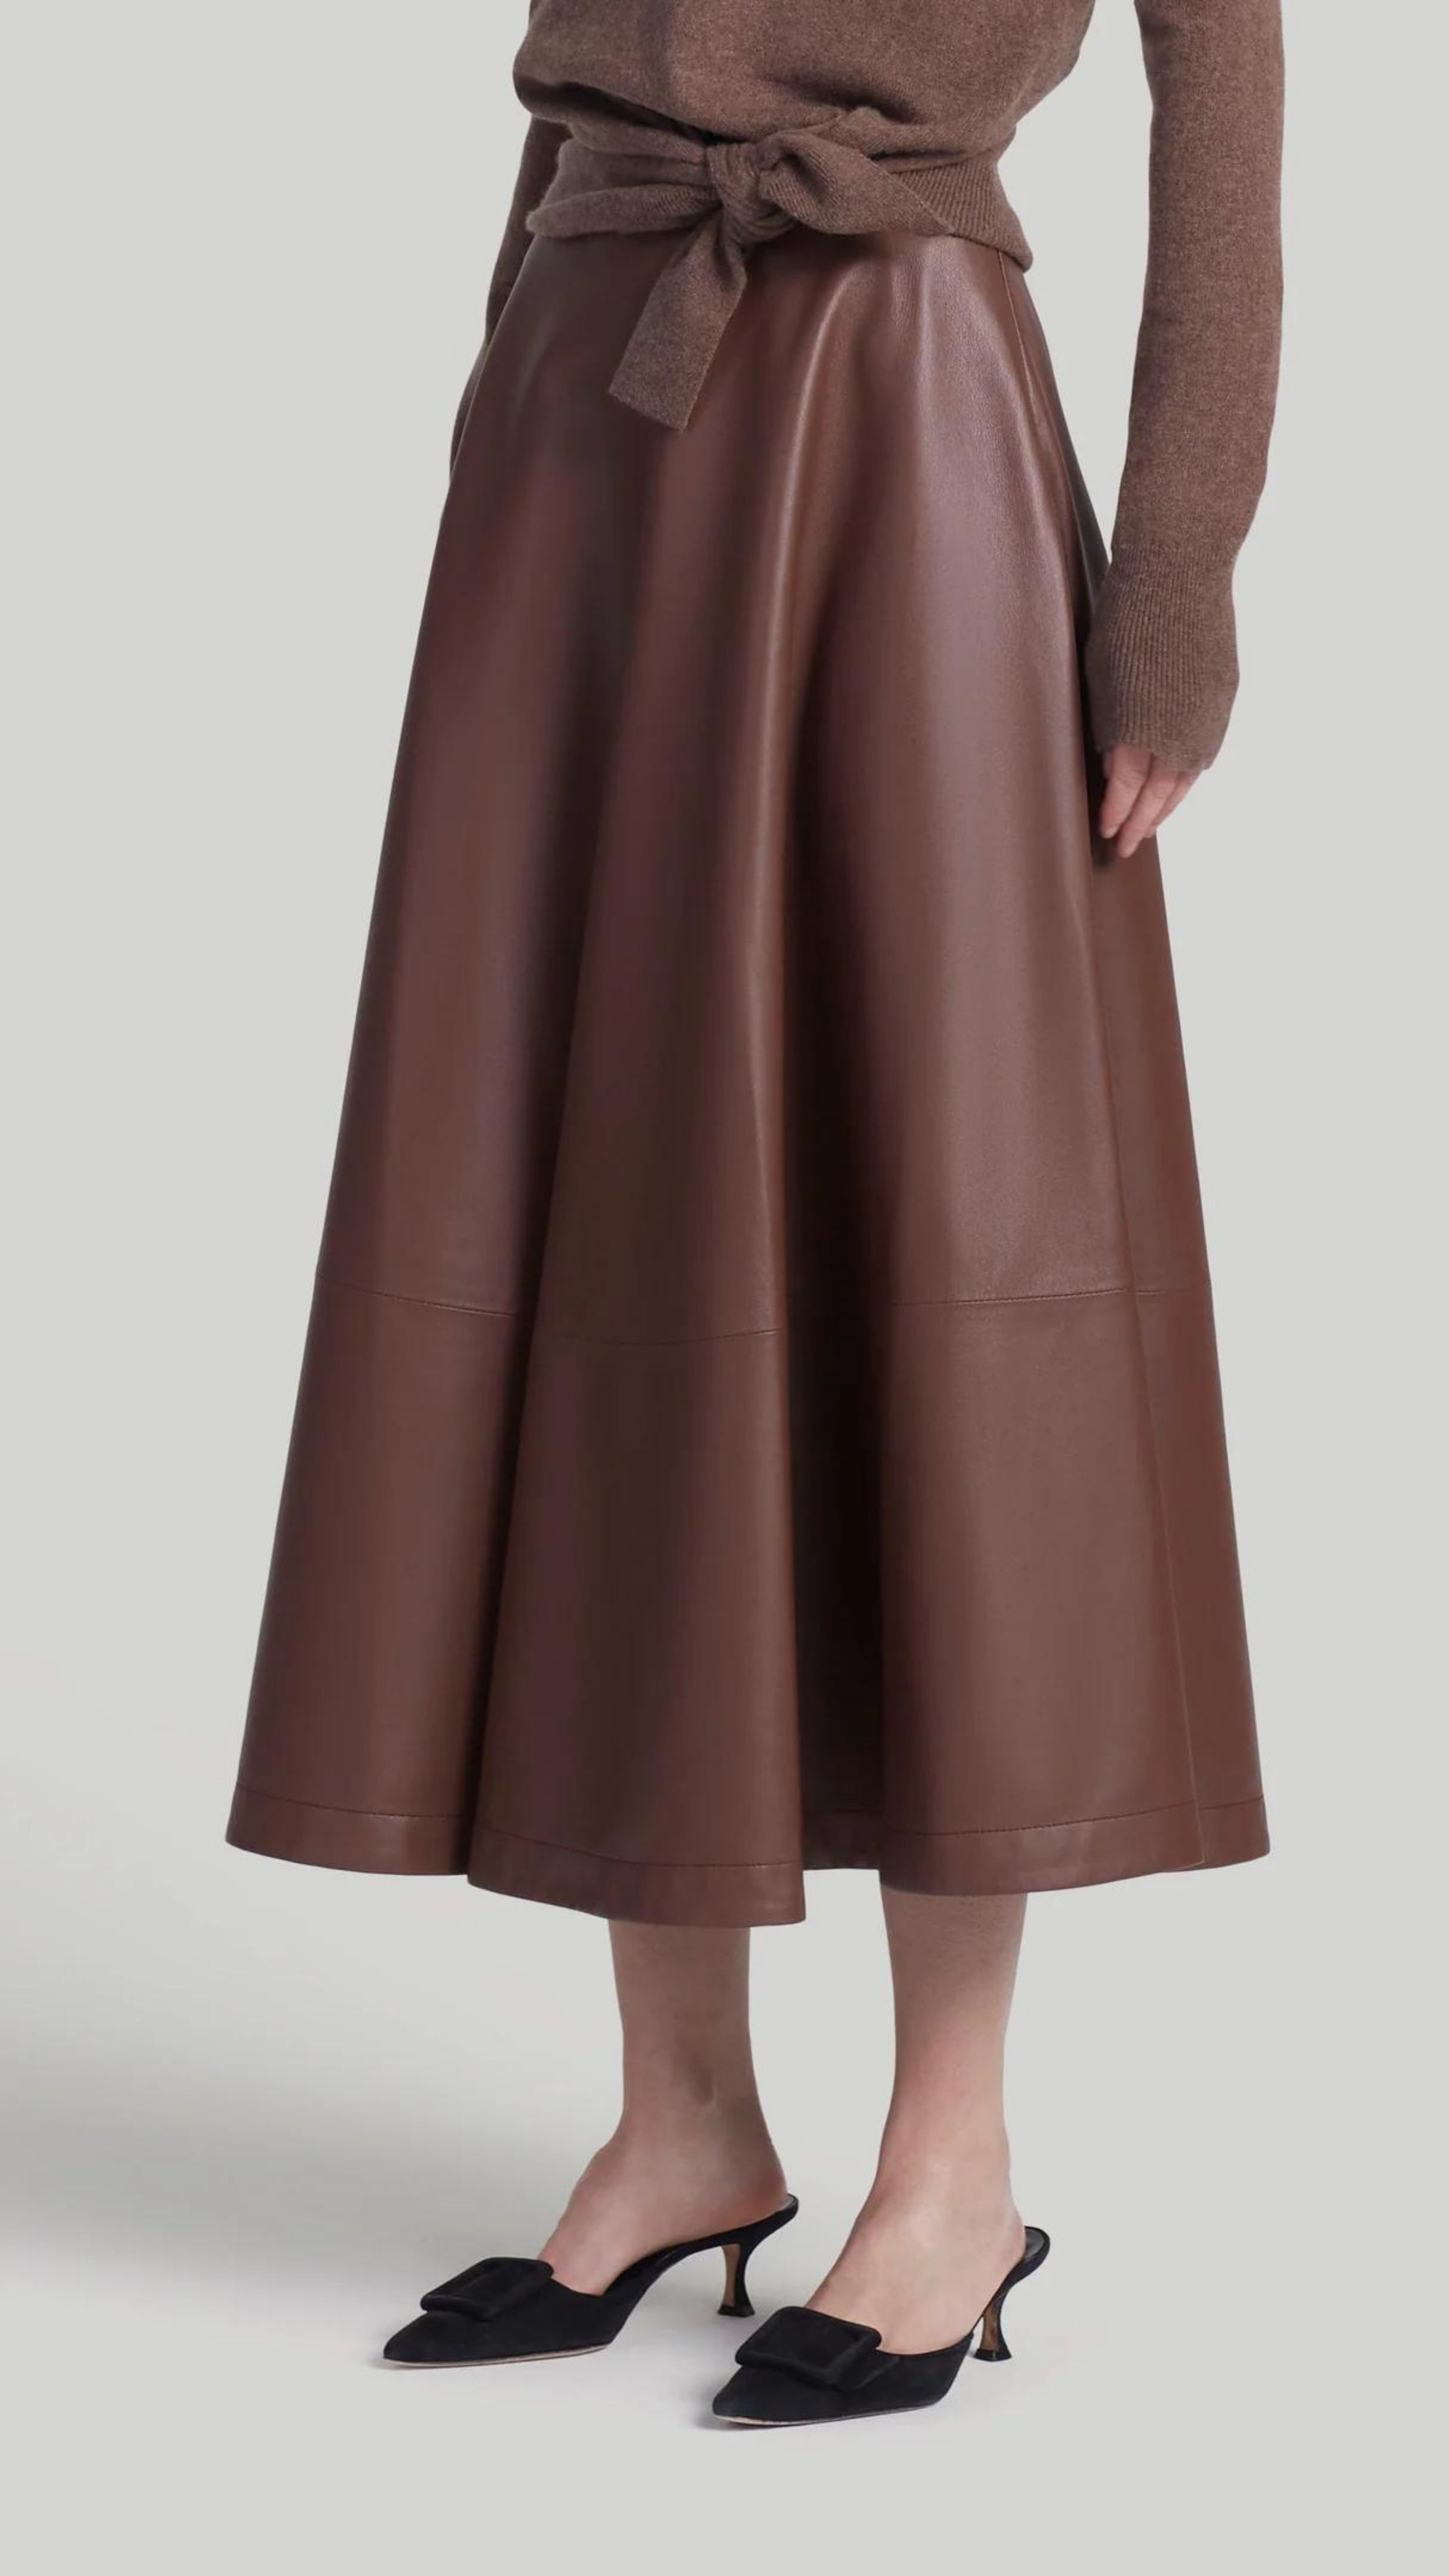 Altuzarra Varda Skirt Made from soft, subtle brown lamb leather, it has an A-line skirt. Midi-length SS24 runway piece. The skirt hem falls to just below the knee. Shown on model facing front and side.